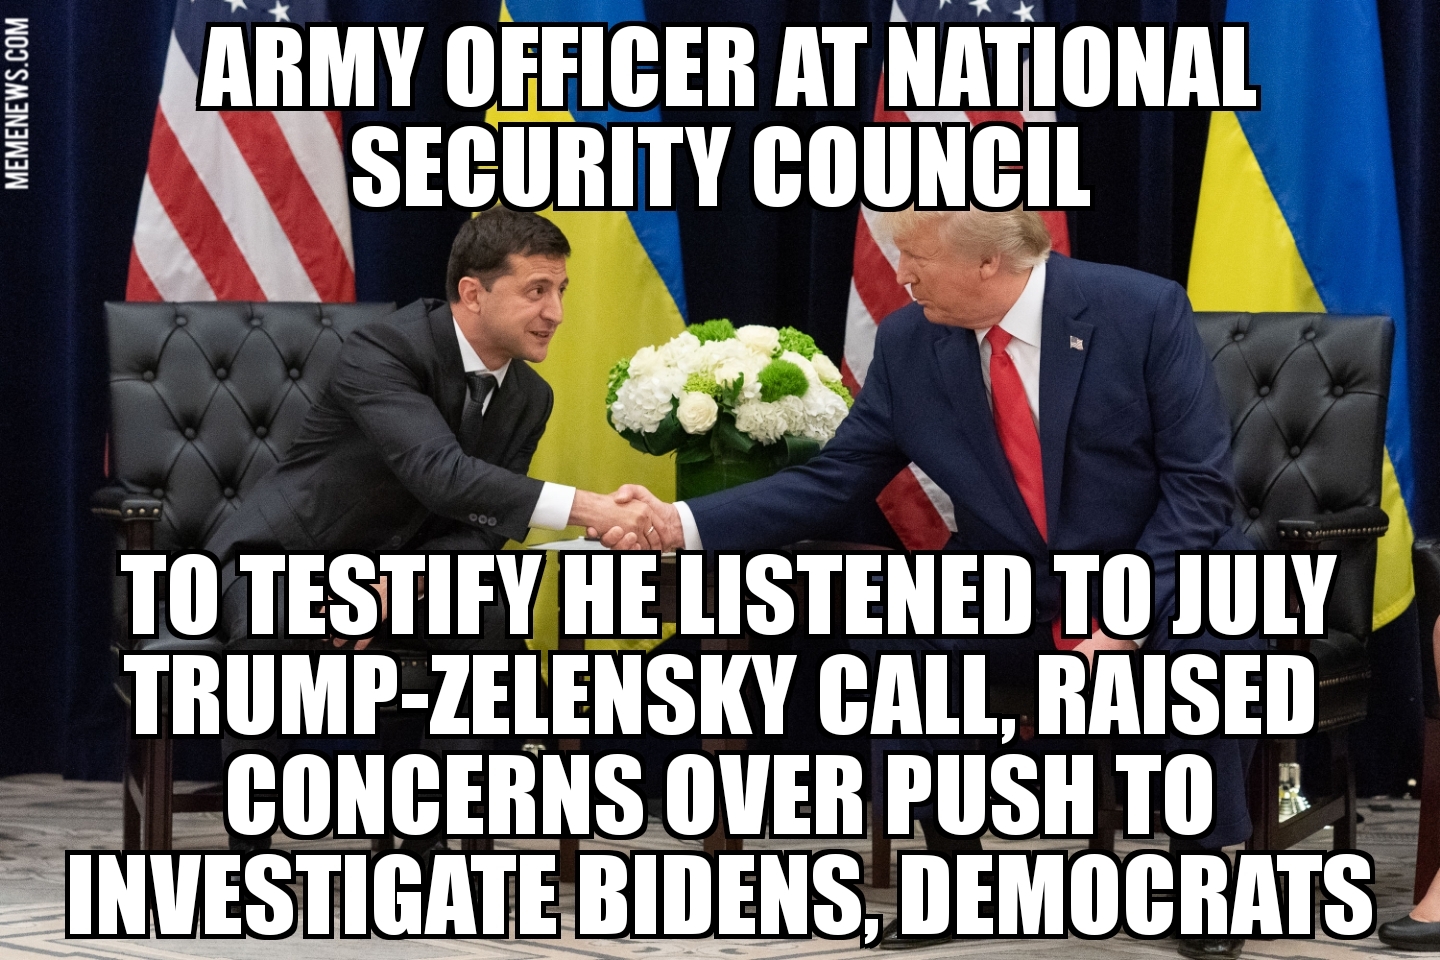 Army officer raised concerns after listening to Trump-Zelensky call